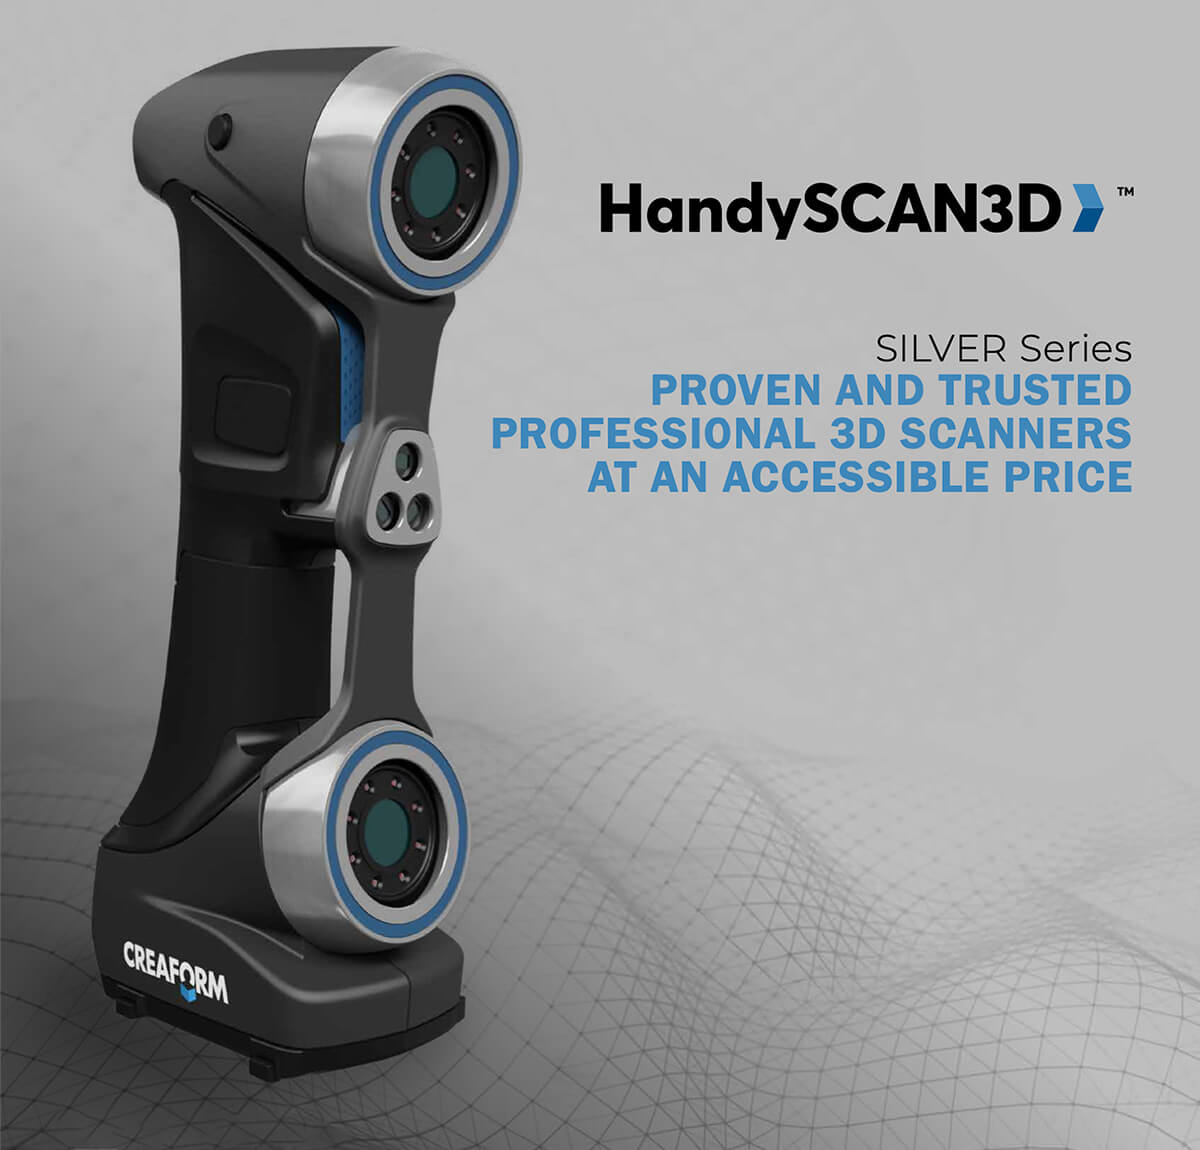 HandySCAN3D silver series. Proven and trusted professional 3D scanners at an accessible price